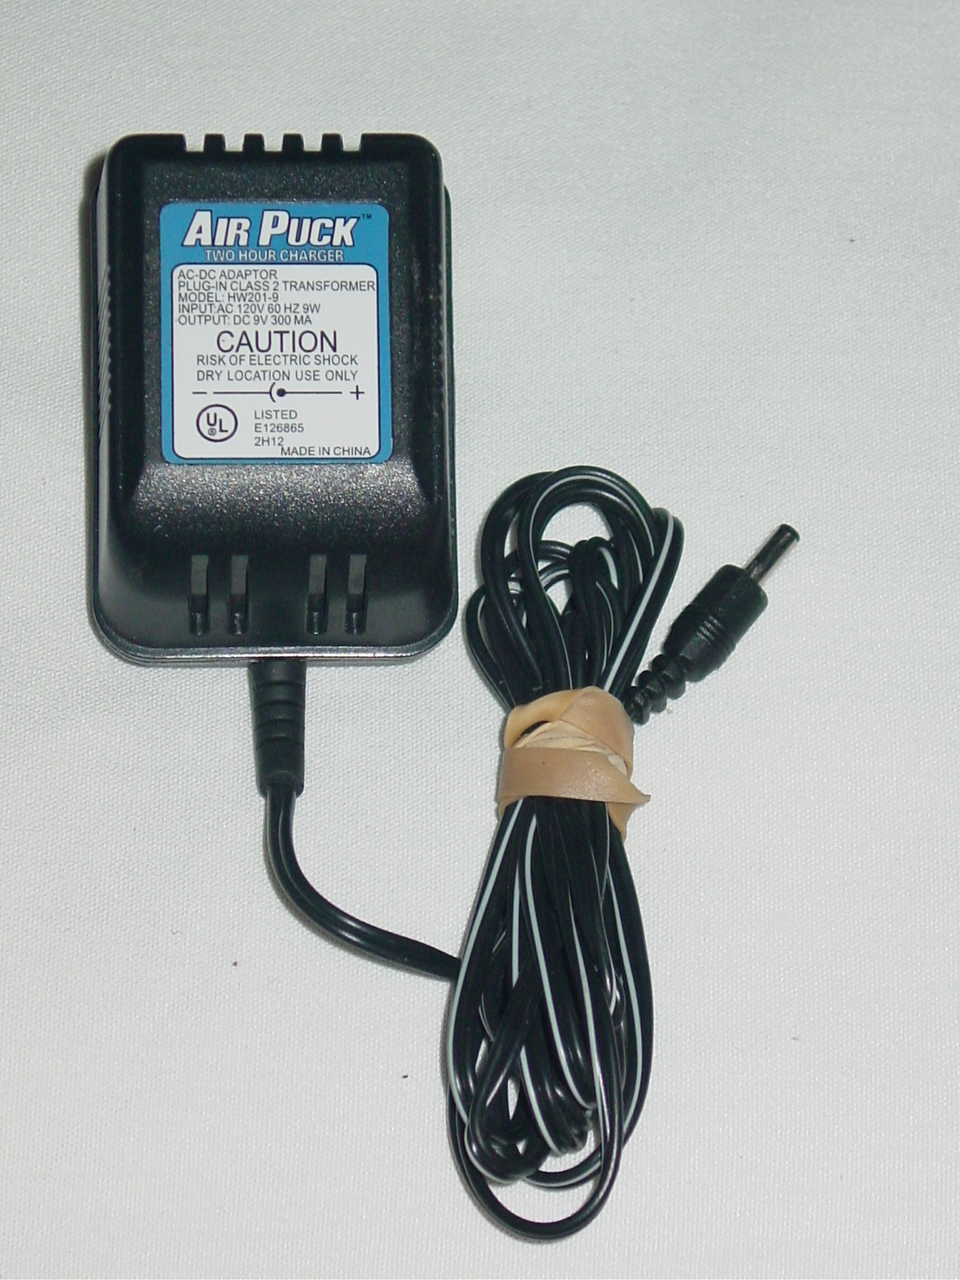 NEW Air Puck HW201-9 Two Hour Charger AC Adapter 9V 300mA